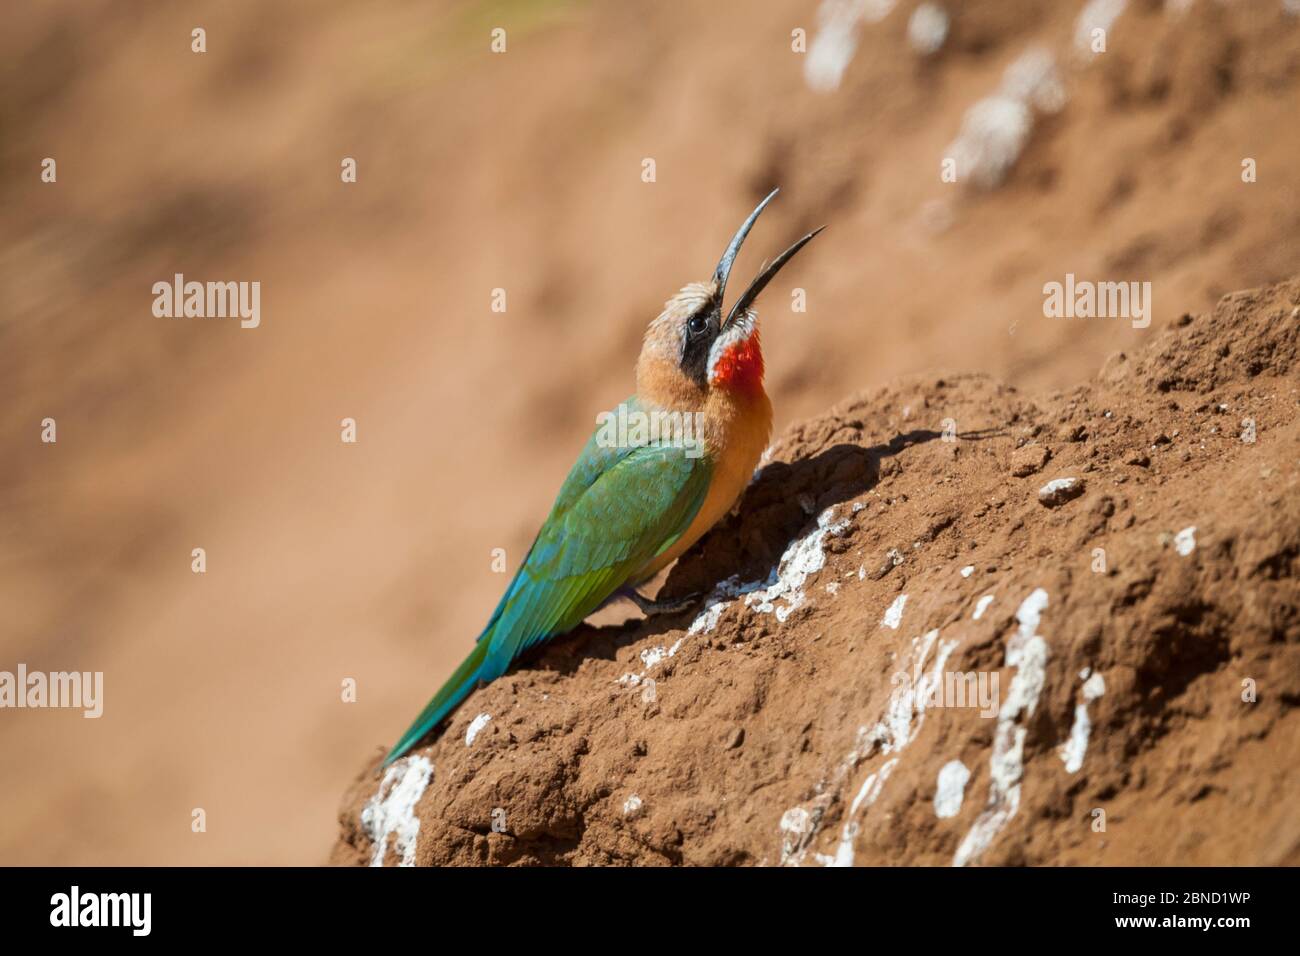 White-fronted bee-eater (Merops bullockoides) calling while perched near its nesting hole, Luvuvhu River, Kruger National Park, South Africa. Stock Photo